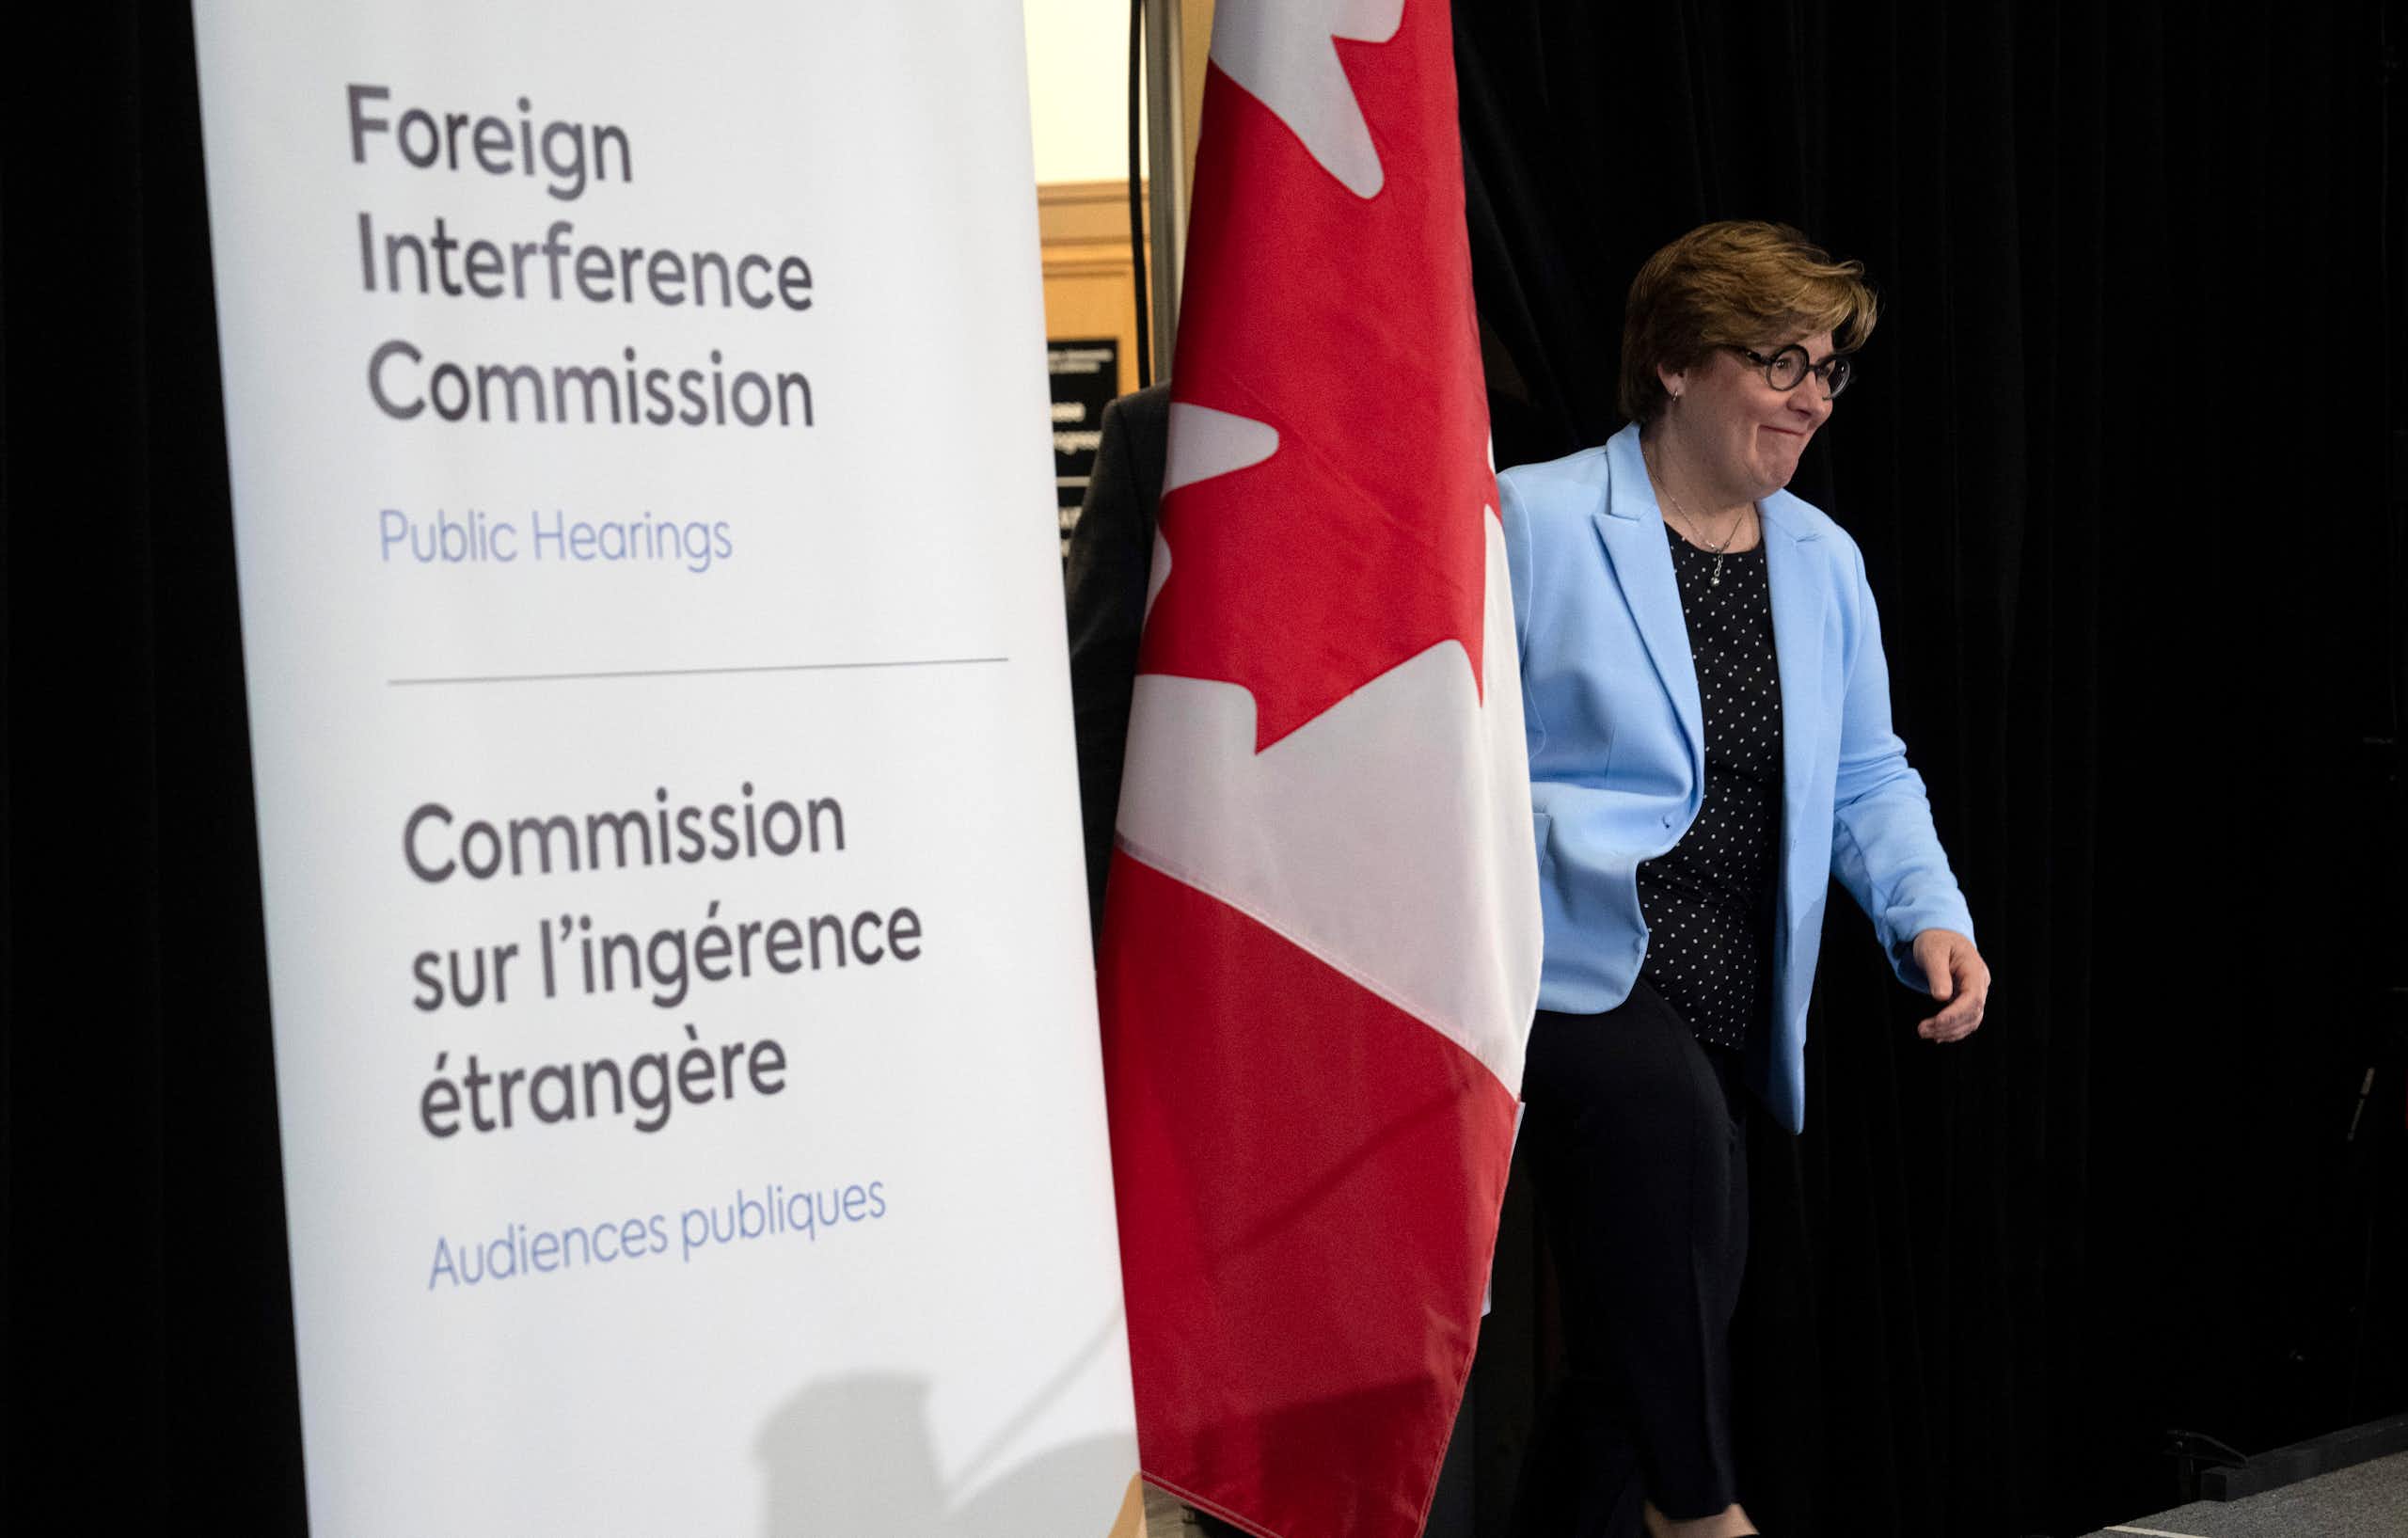 A woman in a pale blue jacket and wearing glasses appears next to a banner that read Foreign Interference Commission.